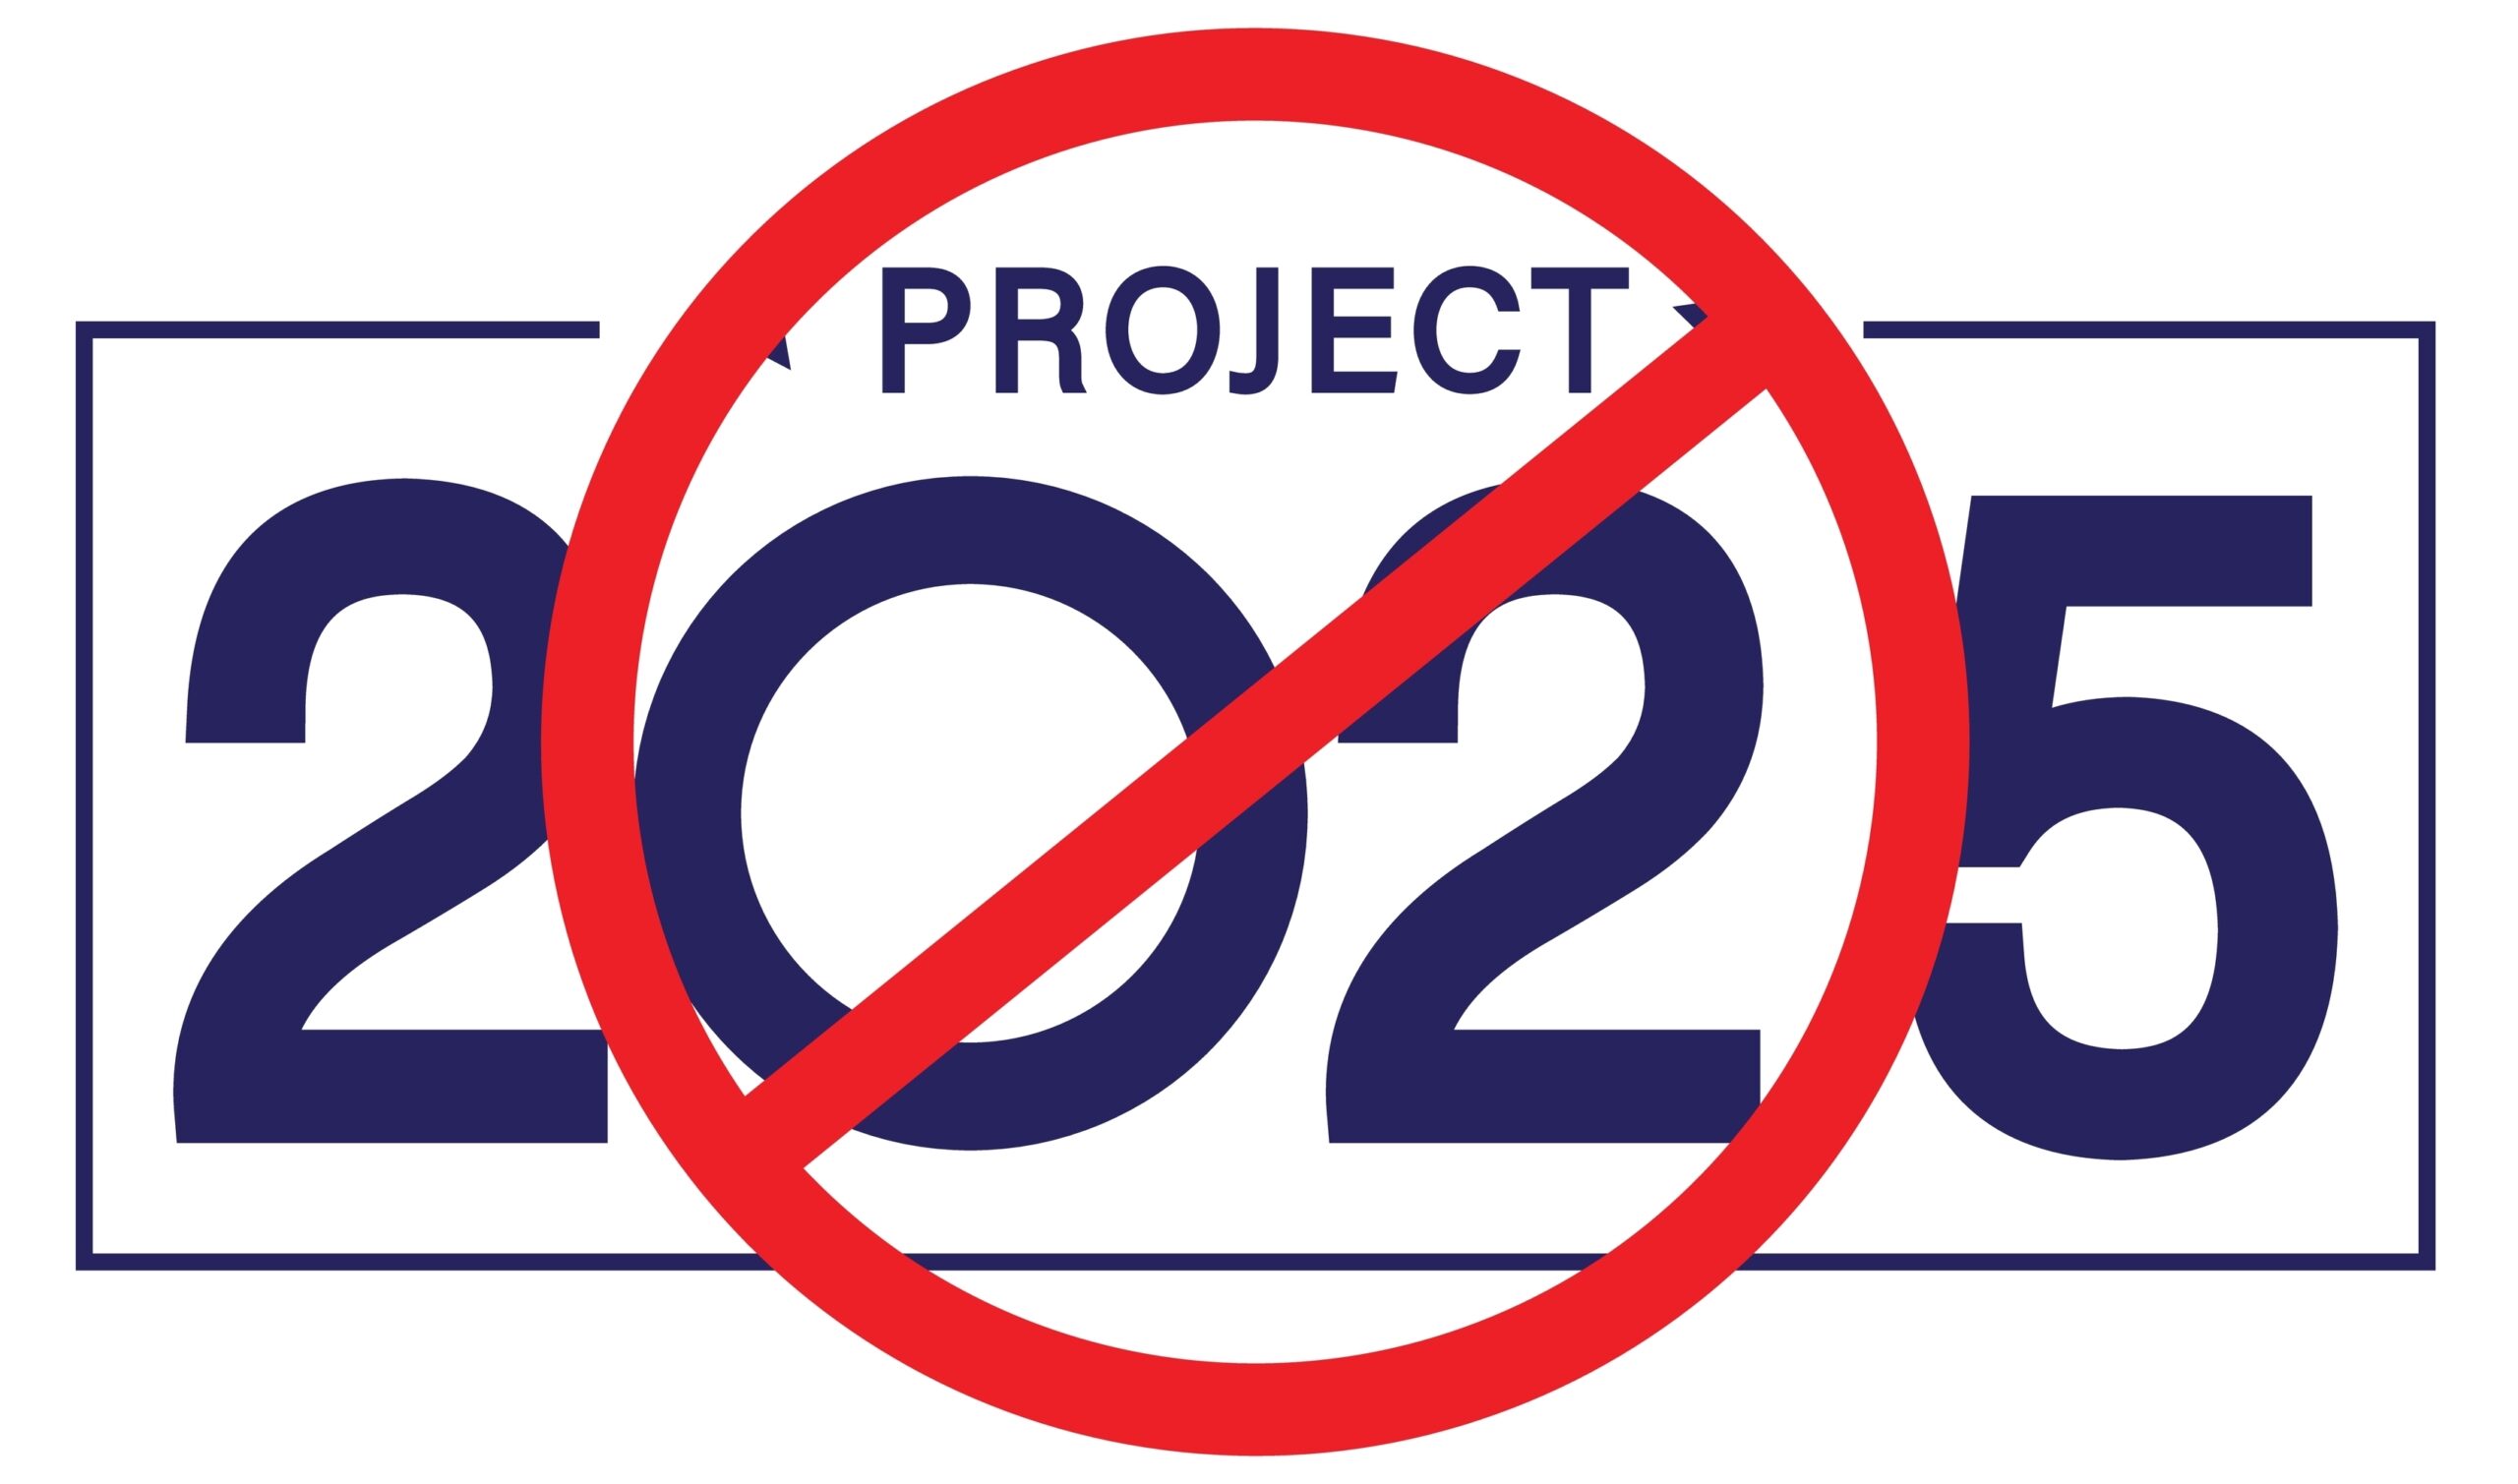 No Project 2025